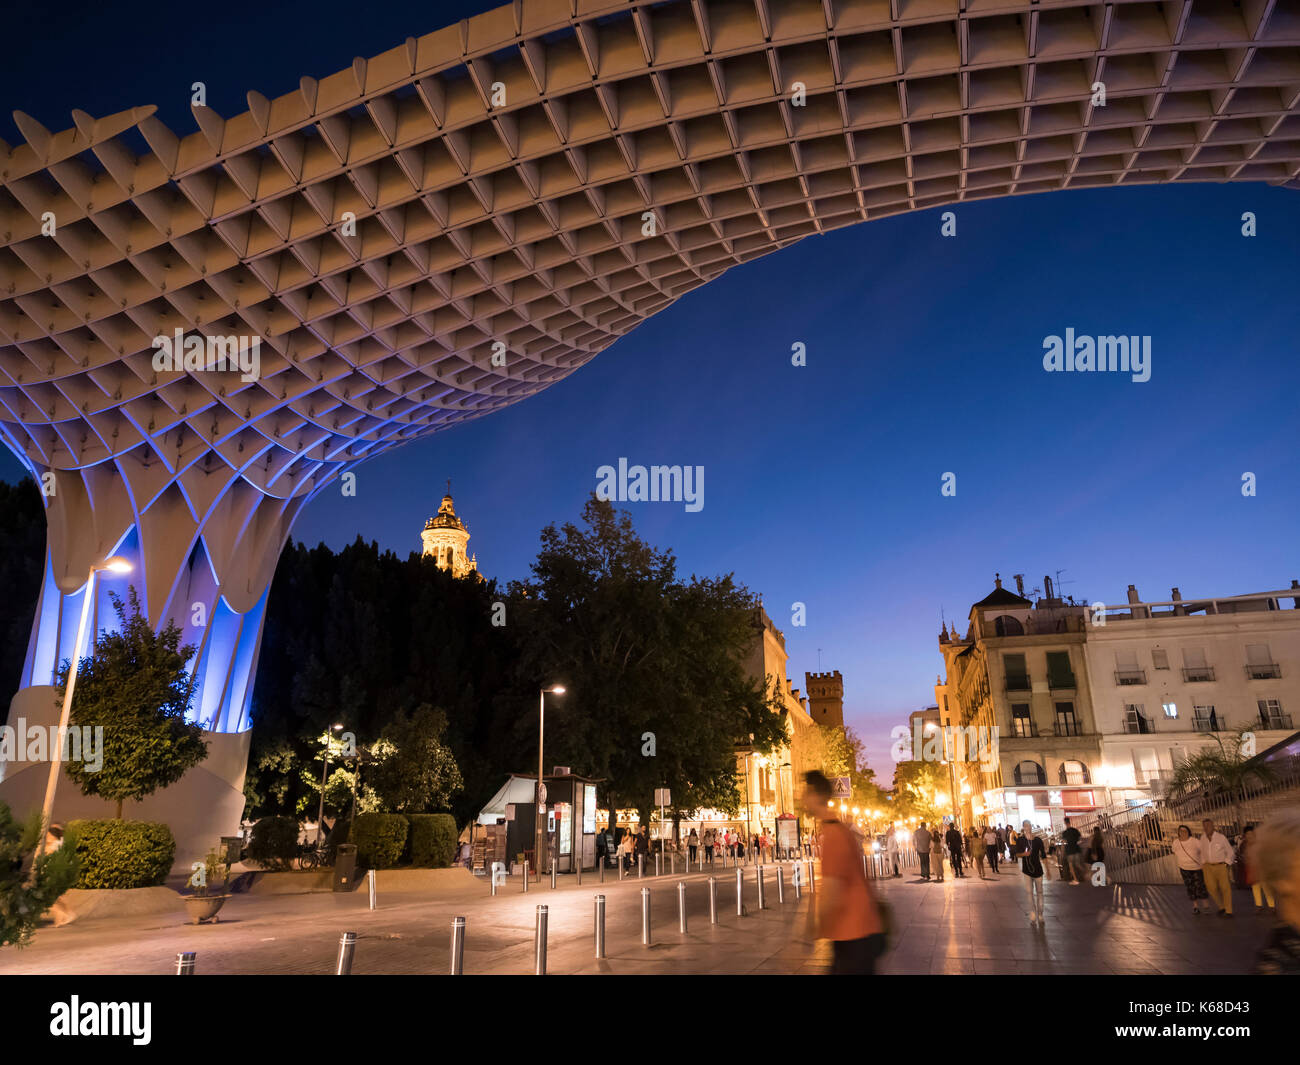 View of Metropol Parasol Night , popularly called 'Mushrooms of Seville', carried out by the architect Jürgen Mayer, Seville, Andalusia, Spain Stock Photo